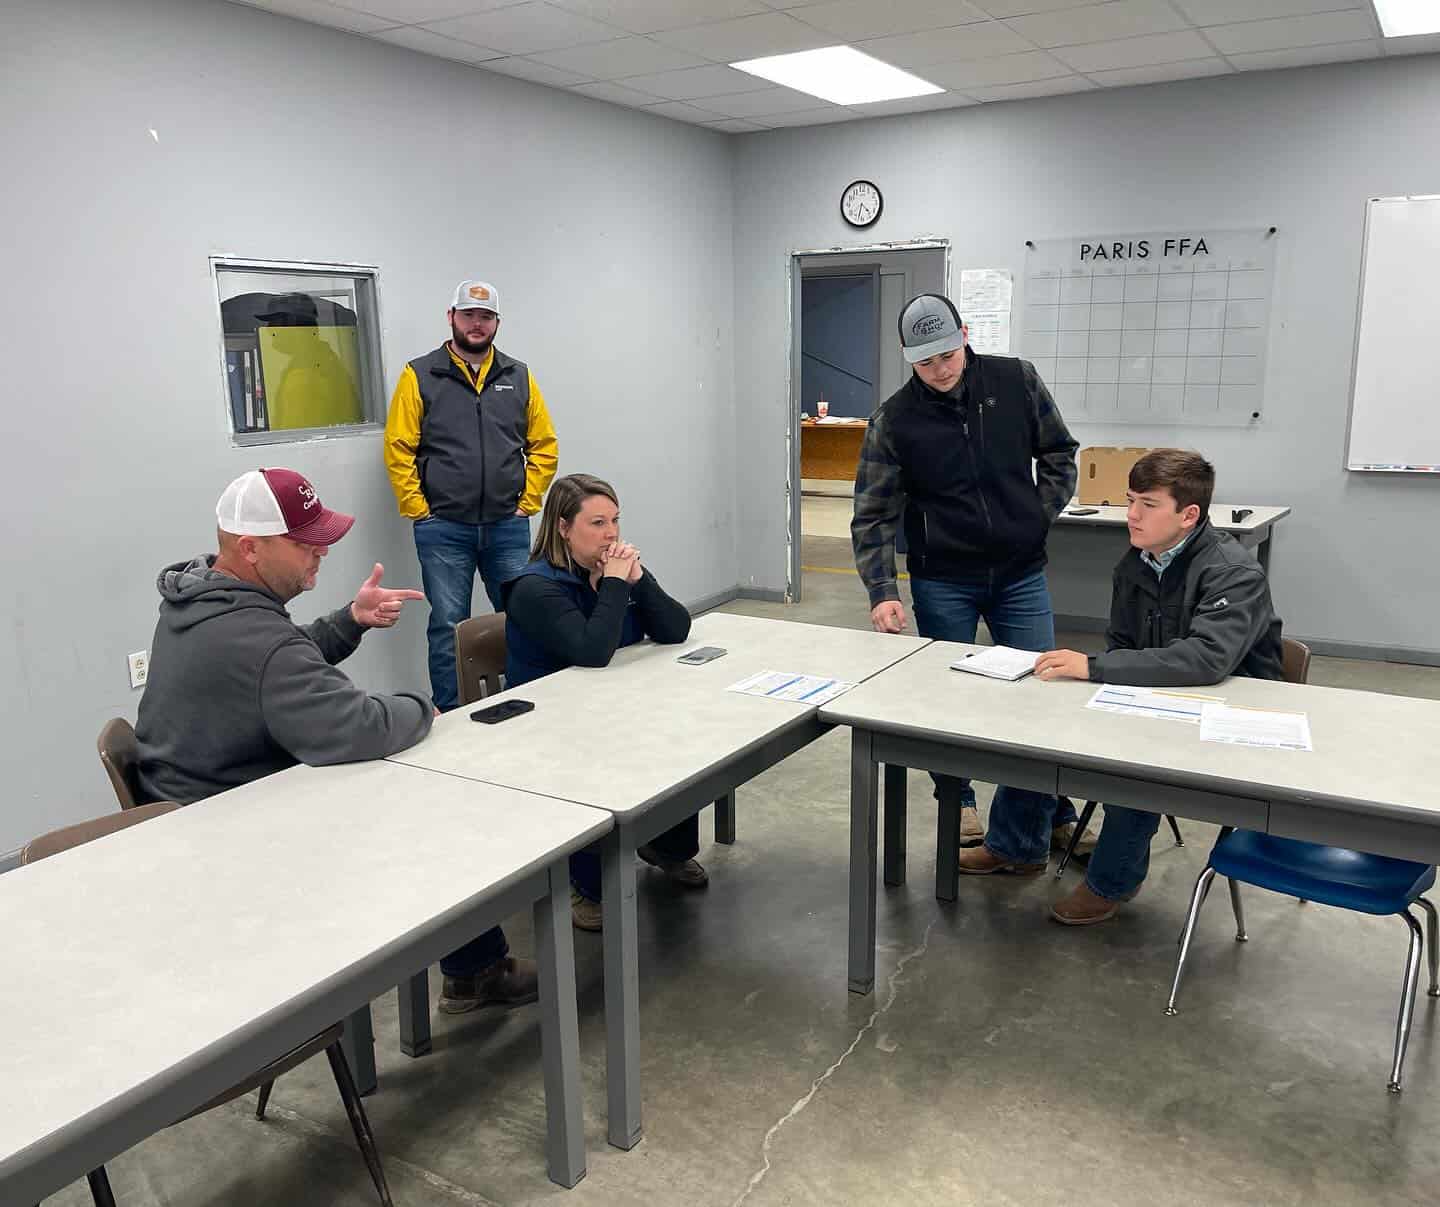 Paris FFA members Gage Benskin and Reid Ragsdale (seated on the right) collaborate with Brevant seeds representatives to sharpen their sales skills.